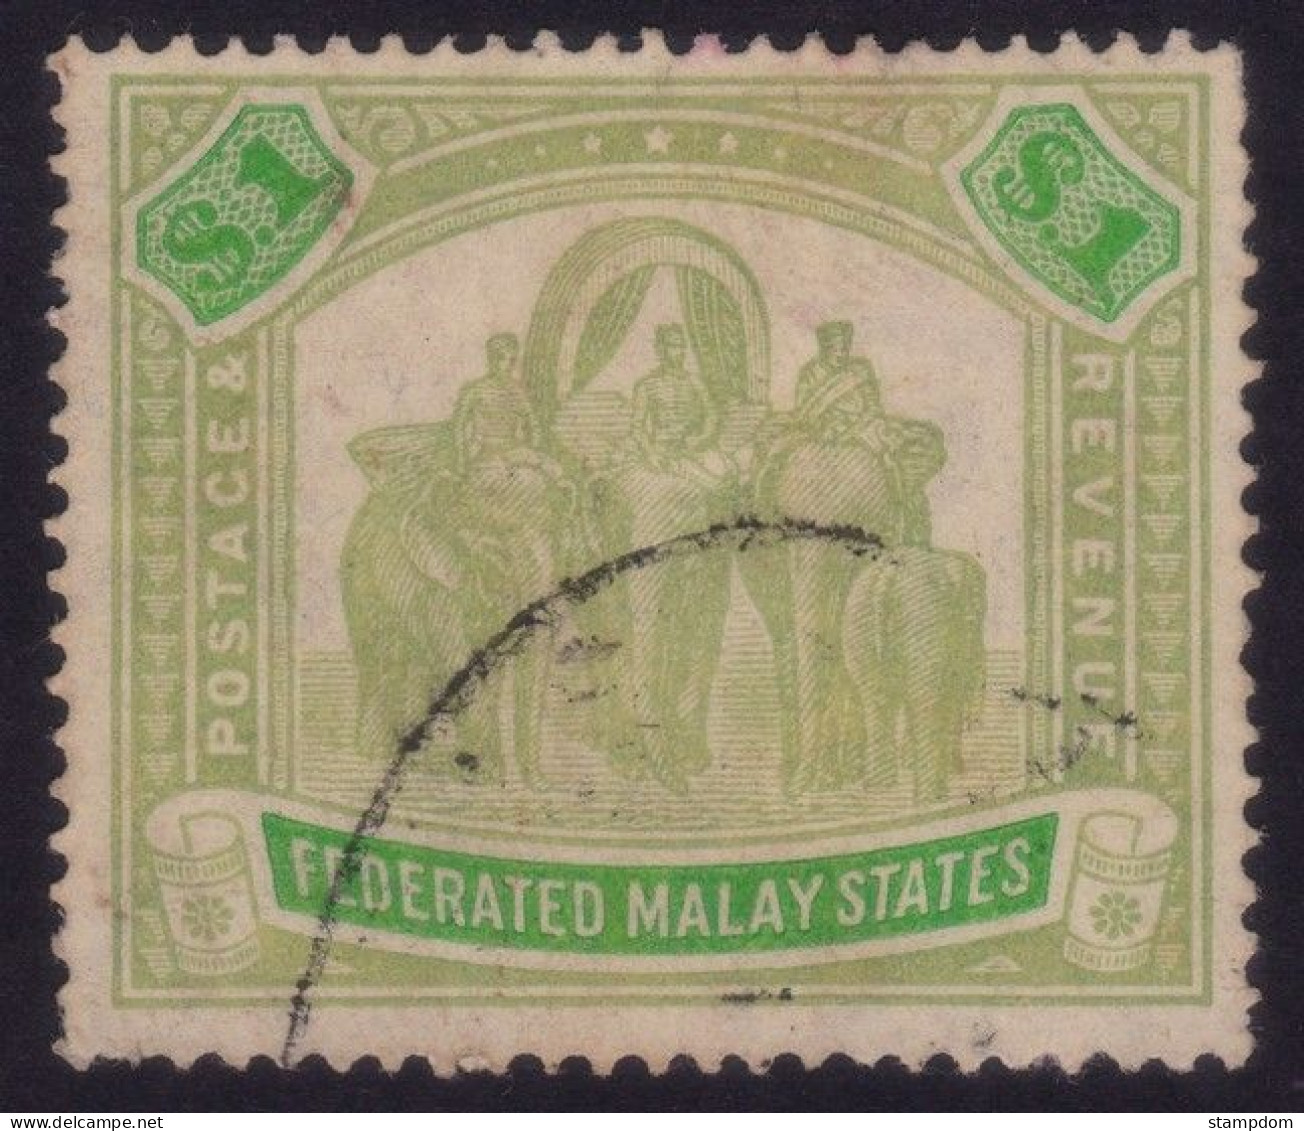 FEDERATED MALAY STATES FMS 1926 $1 Wmk.MSCA Sc#73a USED @TE278 - Federated Malay States